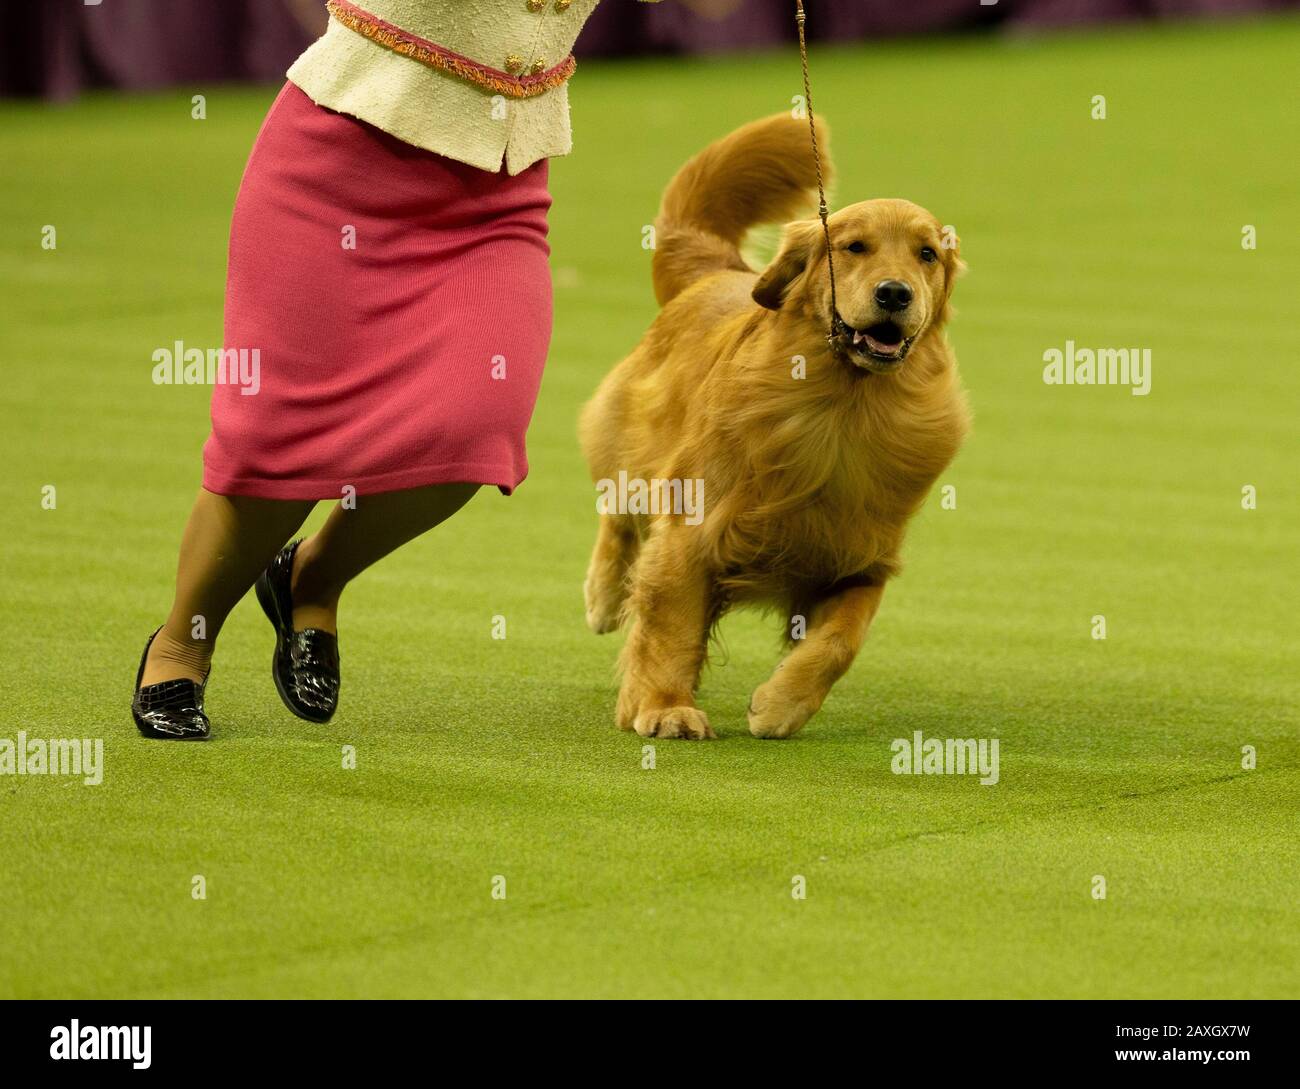 New York, NY - February 11, 2020: Winner of Sporting Group Golden Retriever named Daniel runs during 144th Westminster Kennel Club Dog Show at Madison Square Garden Stock Photo